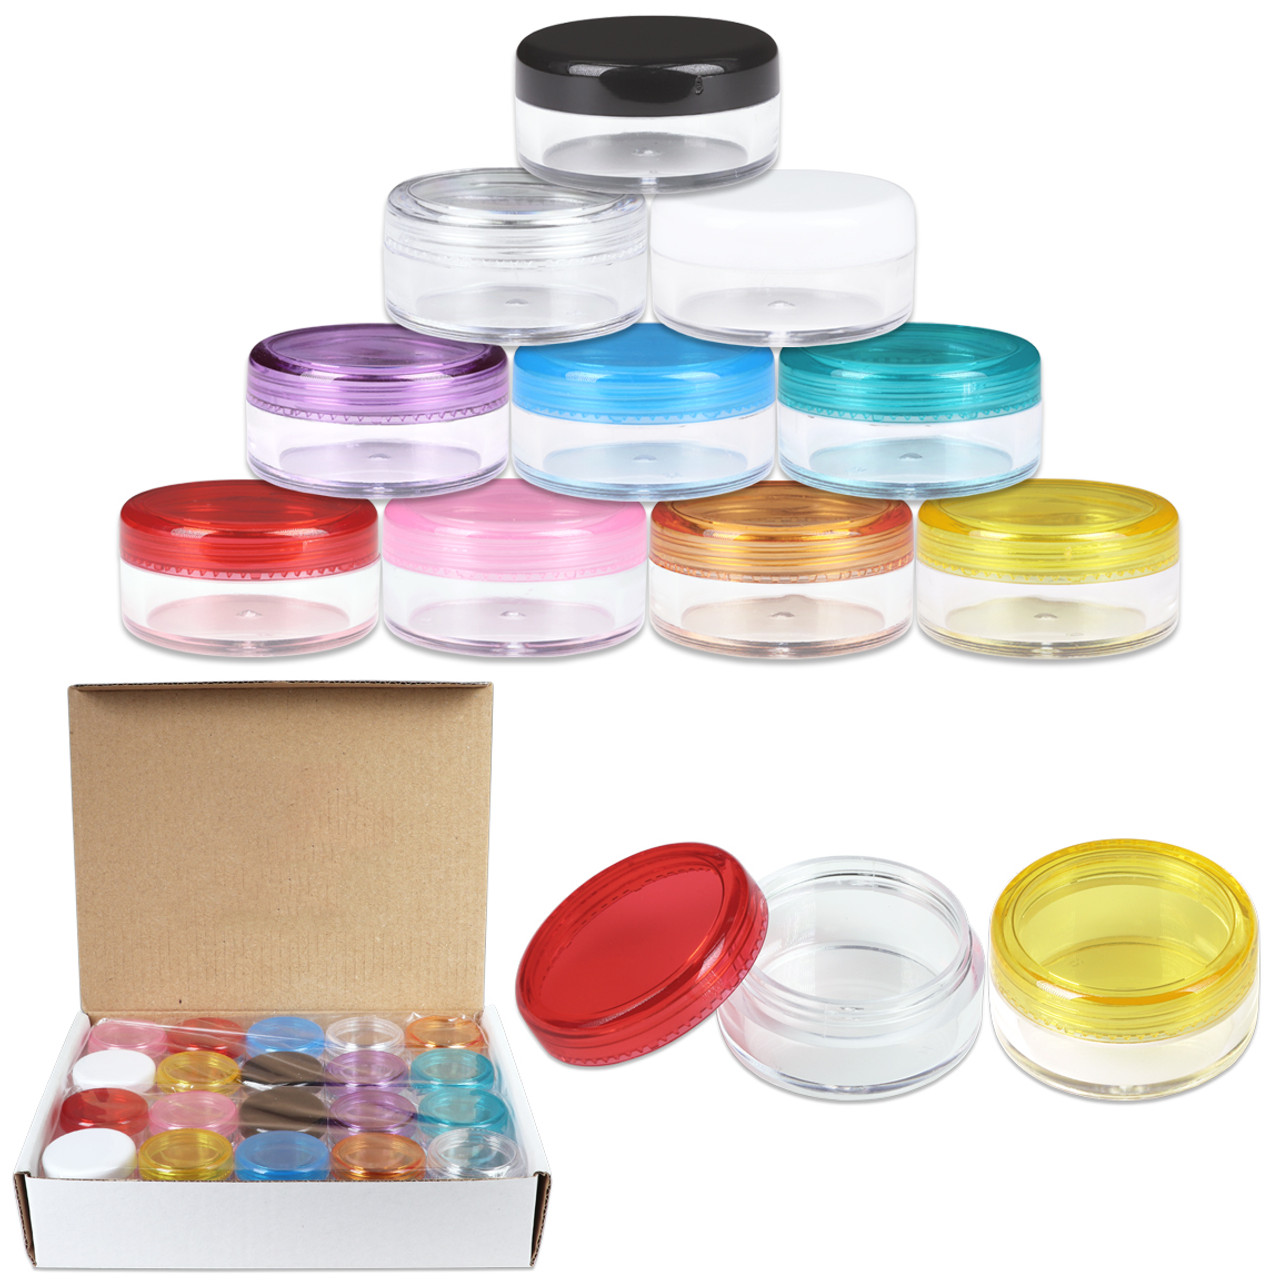 5G/5ML (0.18 oz) Plastic Cosmetic Sample Jars with Multi-Color Lids